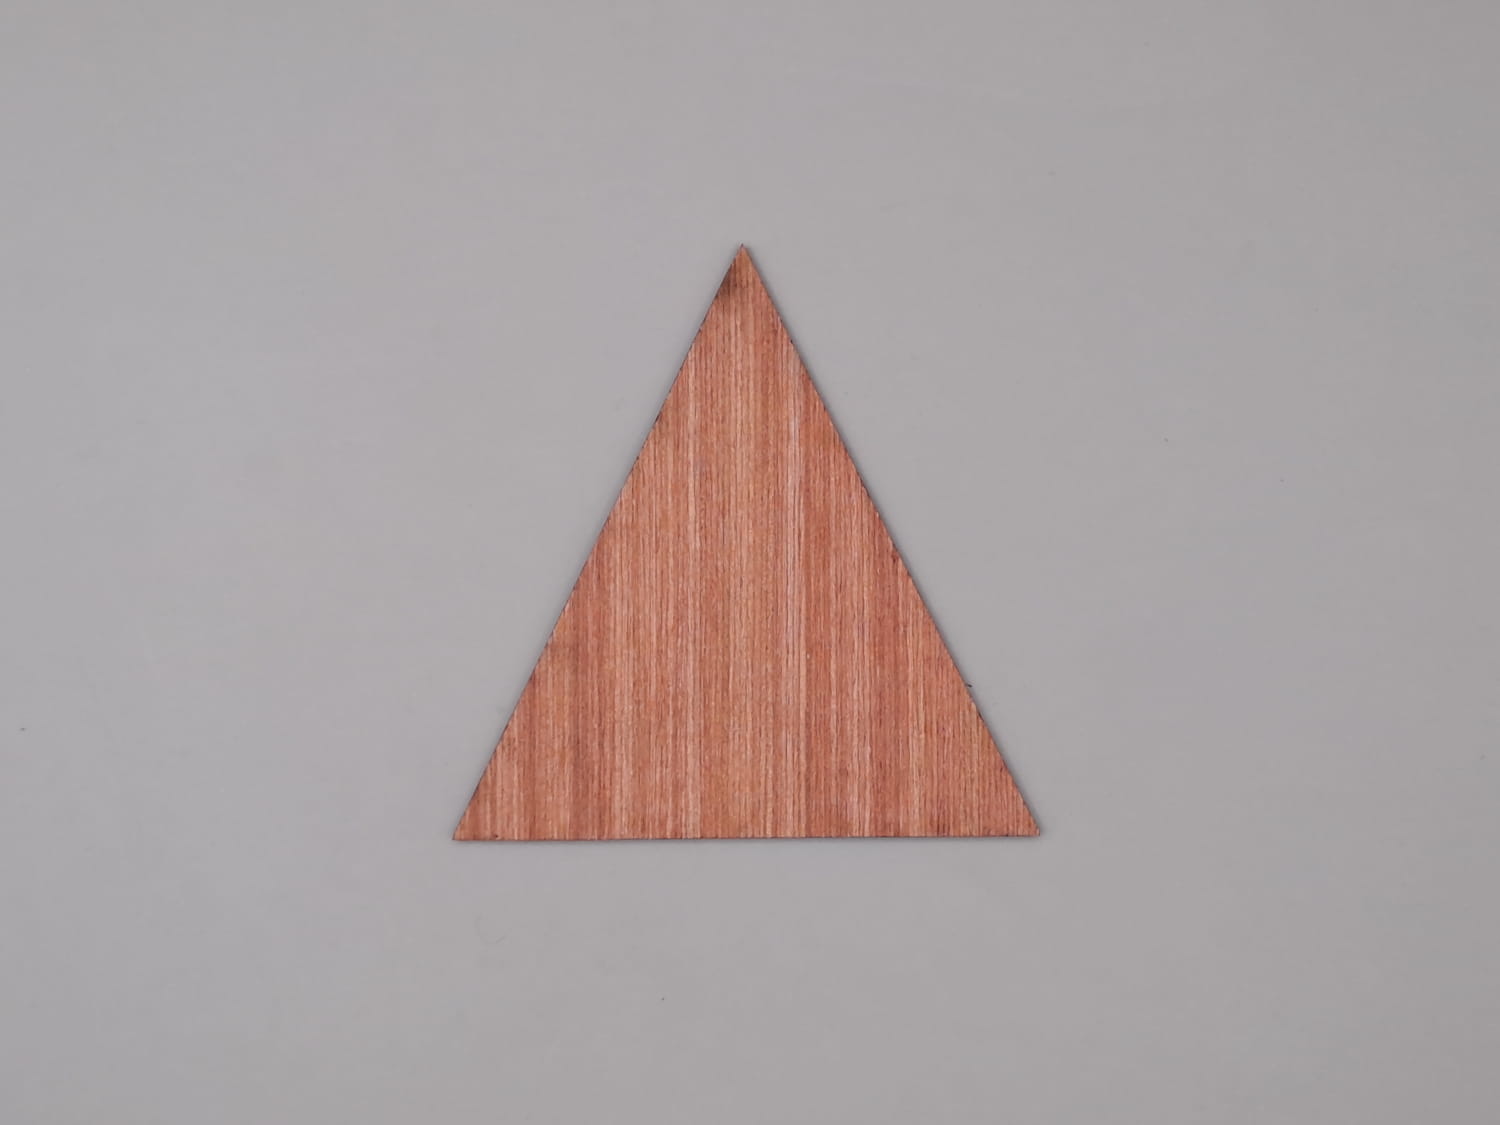 Laser Cut Unfinished Triangle Wood Cutout Free Vector